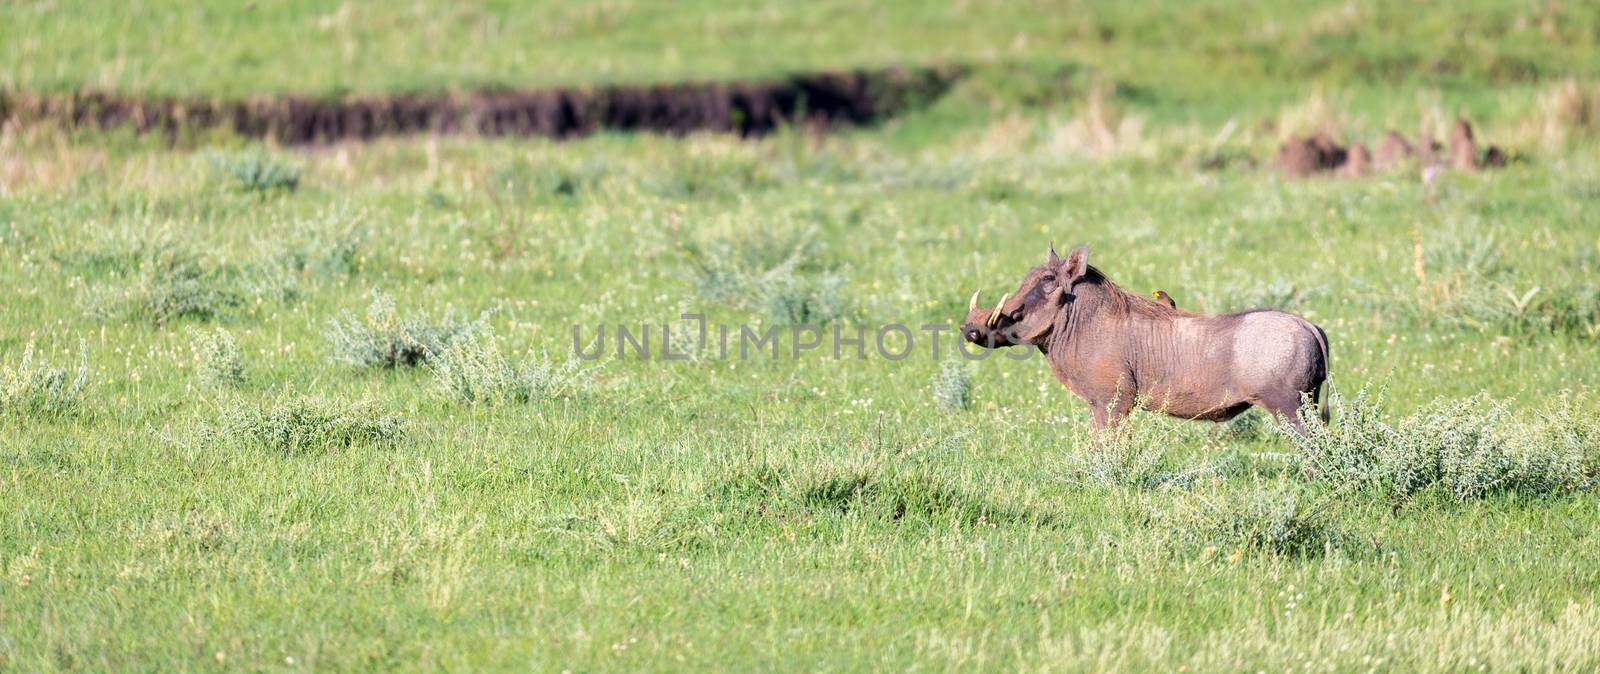 A warthog in the middle of the savanna of Kenya by 25ehaag6